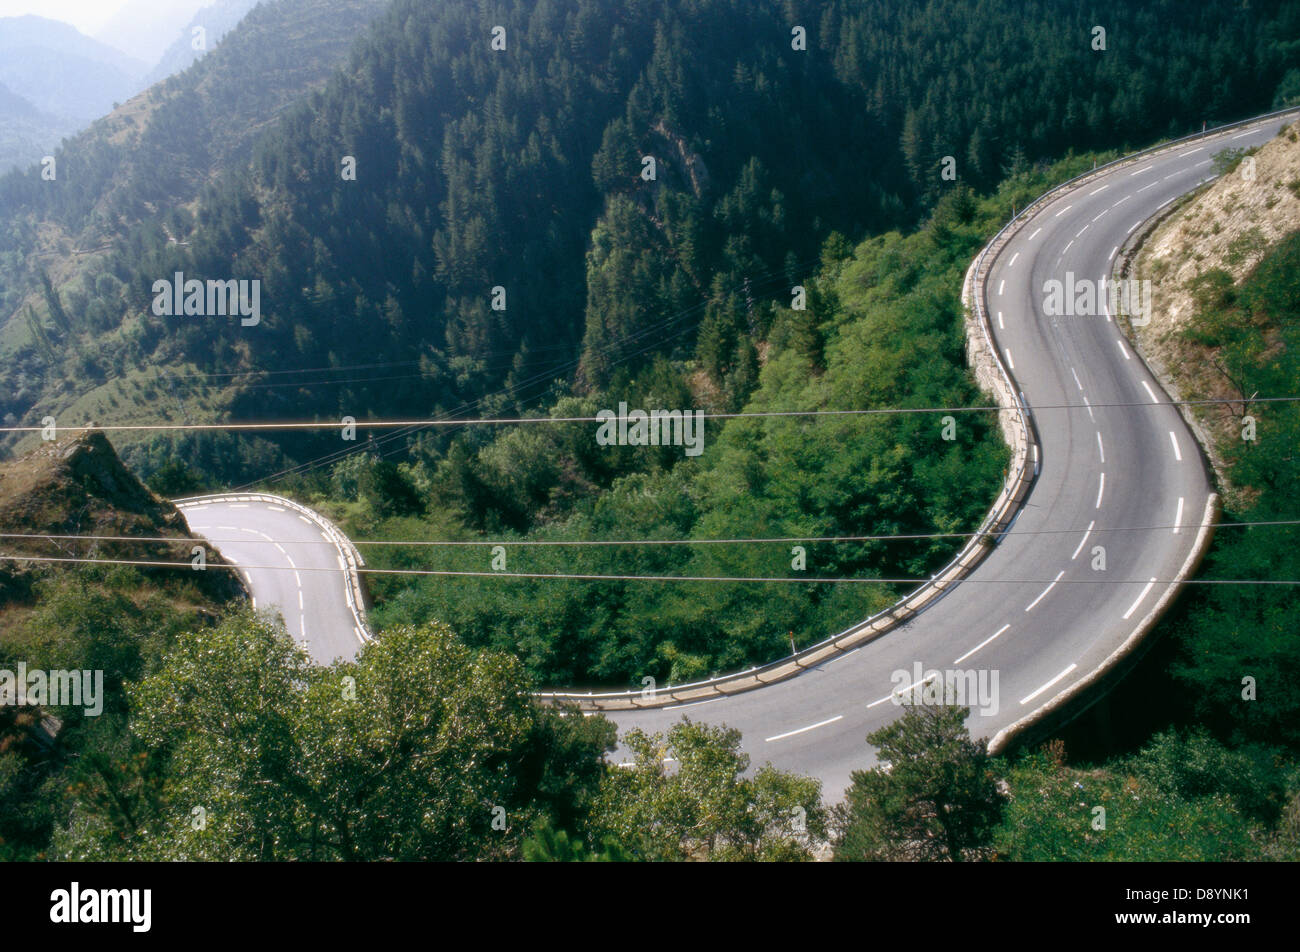 View of curved road running through forest Stock Photo